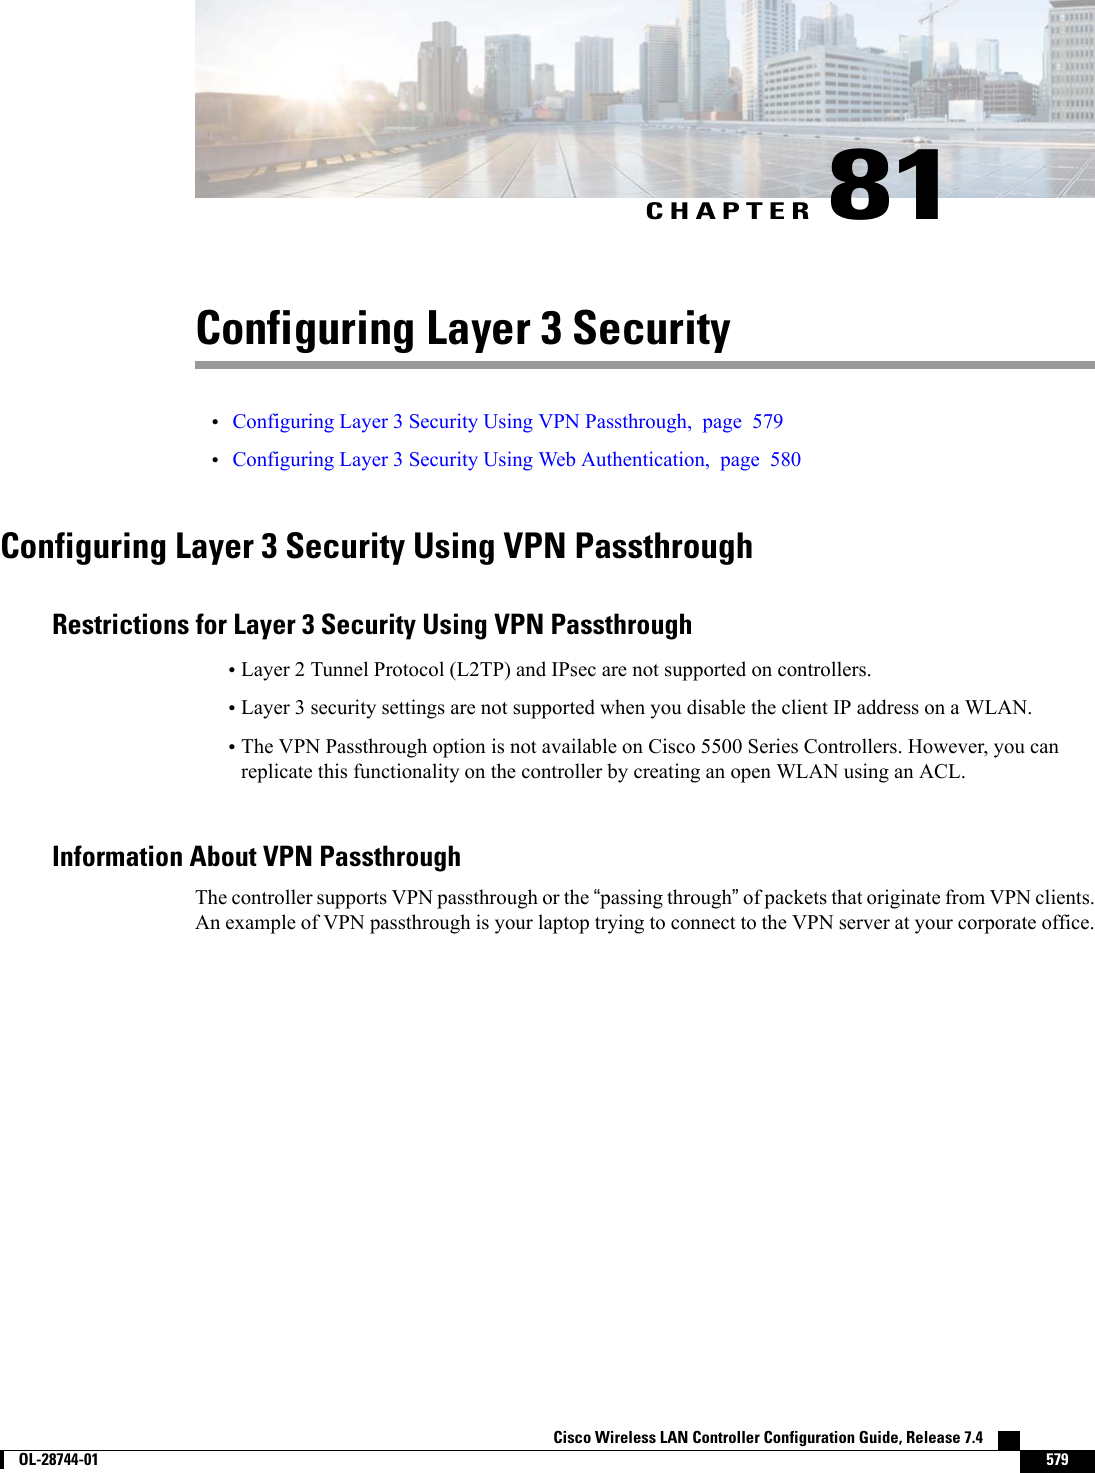 CHAPTER 81Configuring Layer 3 Security•Configuring Layer 3 Security Using VPN Passthrough, page 579•Configuring Layer 3 Security Using Web Authentication, page 580Configuring Layer 3 Security Using VPN PassthroughRestrictions for Layer 3 Security Using VPN Passthrough•Layer 2 Tunnel Protocol (L2TP) and IPsec are not supported on controllers.•Layer 3 security settings are not supported when you disable the client IP address on a WLAN.•The VPN Passthrough option is not available on Cisco 5500 Series Controllers. However, you canreplicate this functionality on the controller by creating an open WLAN using an ACL.Information About VPN PassthroughThe controller supports VPN passthrough or the “passing through”of packets that originate from VPN clients.An example of VPN passthrough is your laptop trying to connect to the VPN server at your corporate office.Cisco Wireless LAN Controller Configuration Guide, Release 7.4        OL-28744-01 579